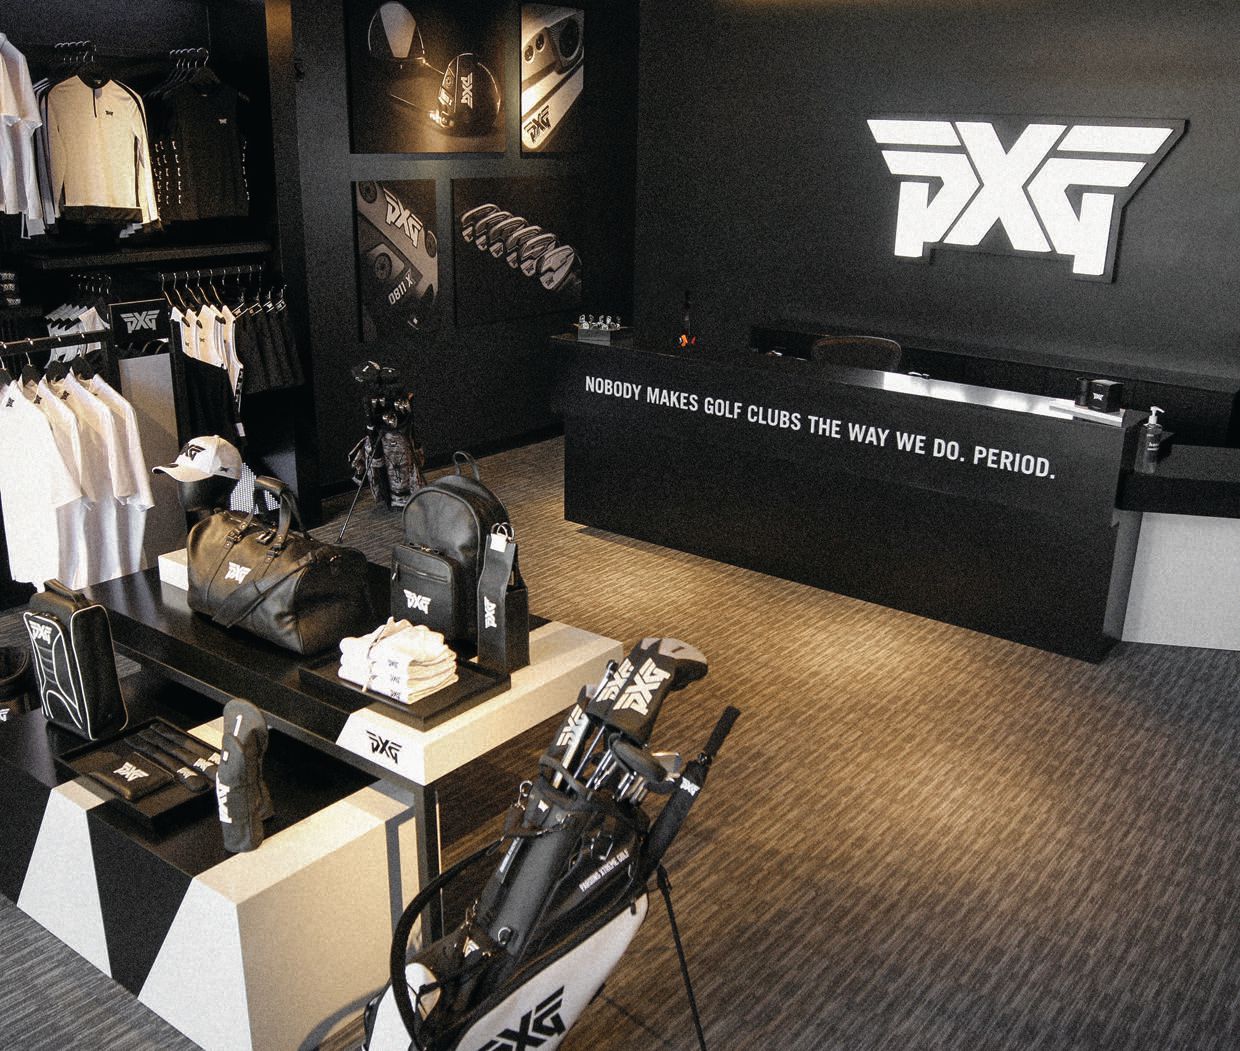 All the latest in golf is found at the new PXG. PHOTO COURTESY OF BRANDS